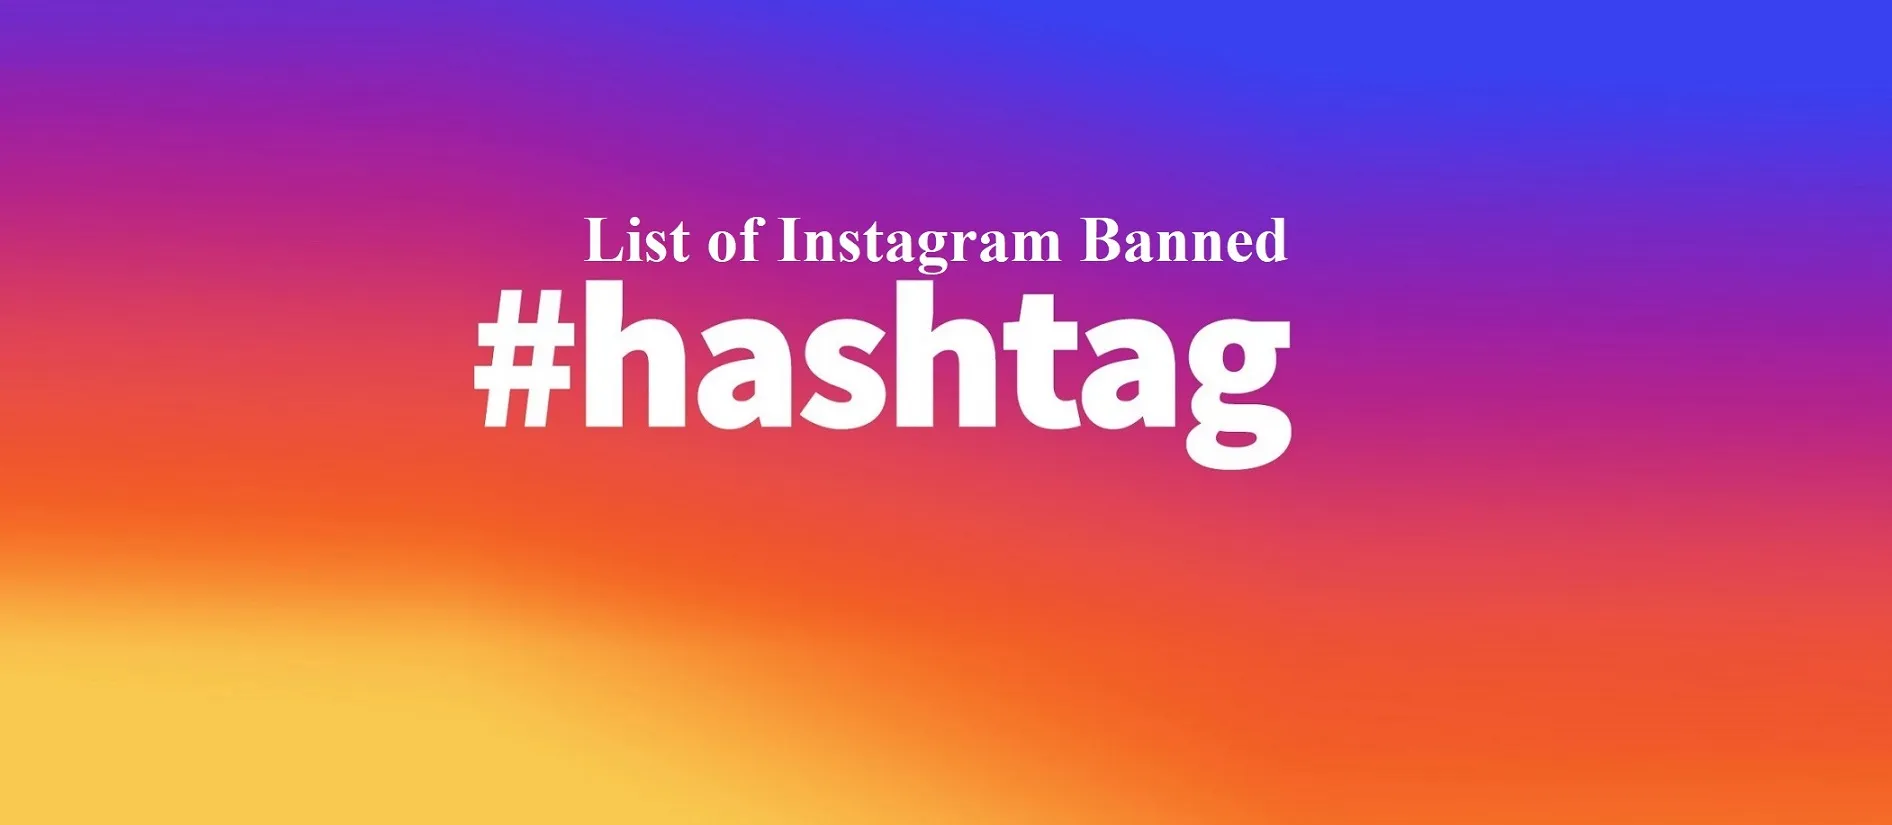 Banned Instagram hashtags in 2022